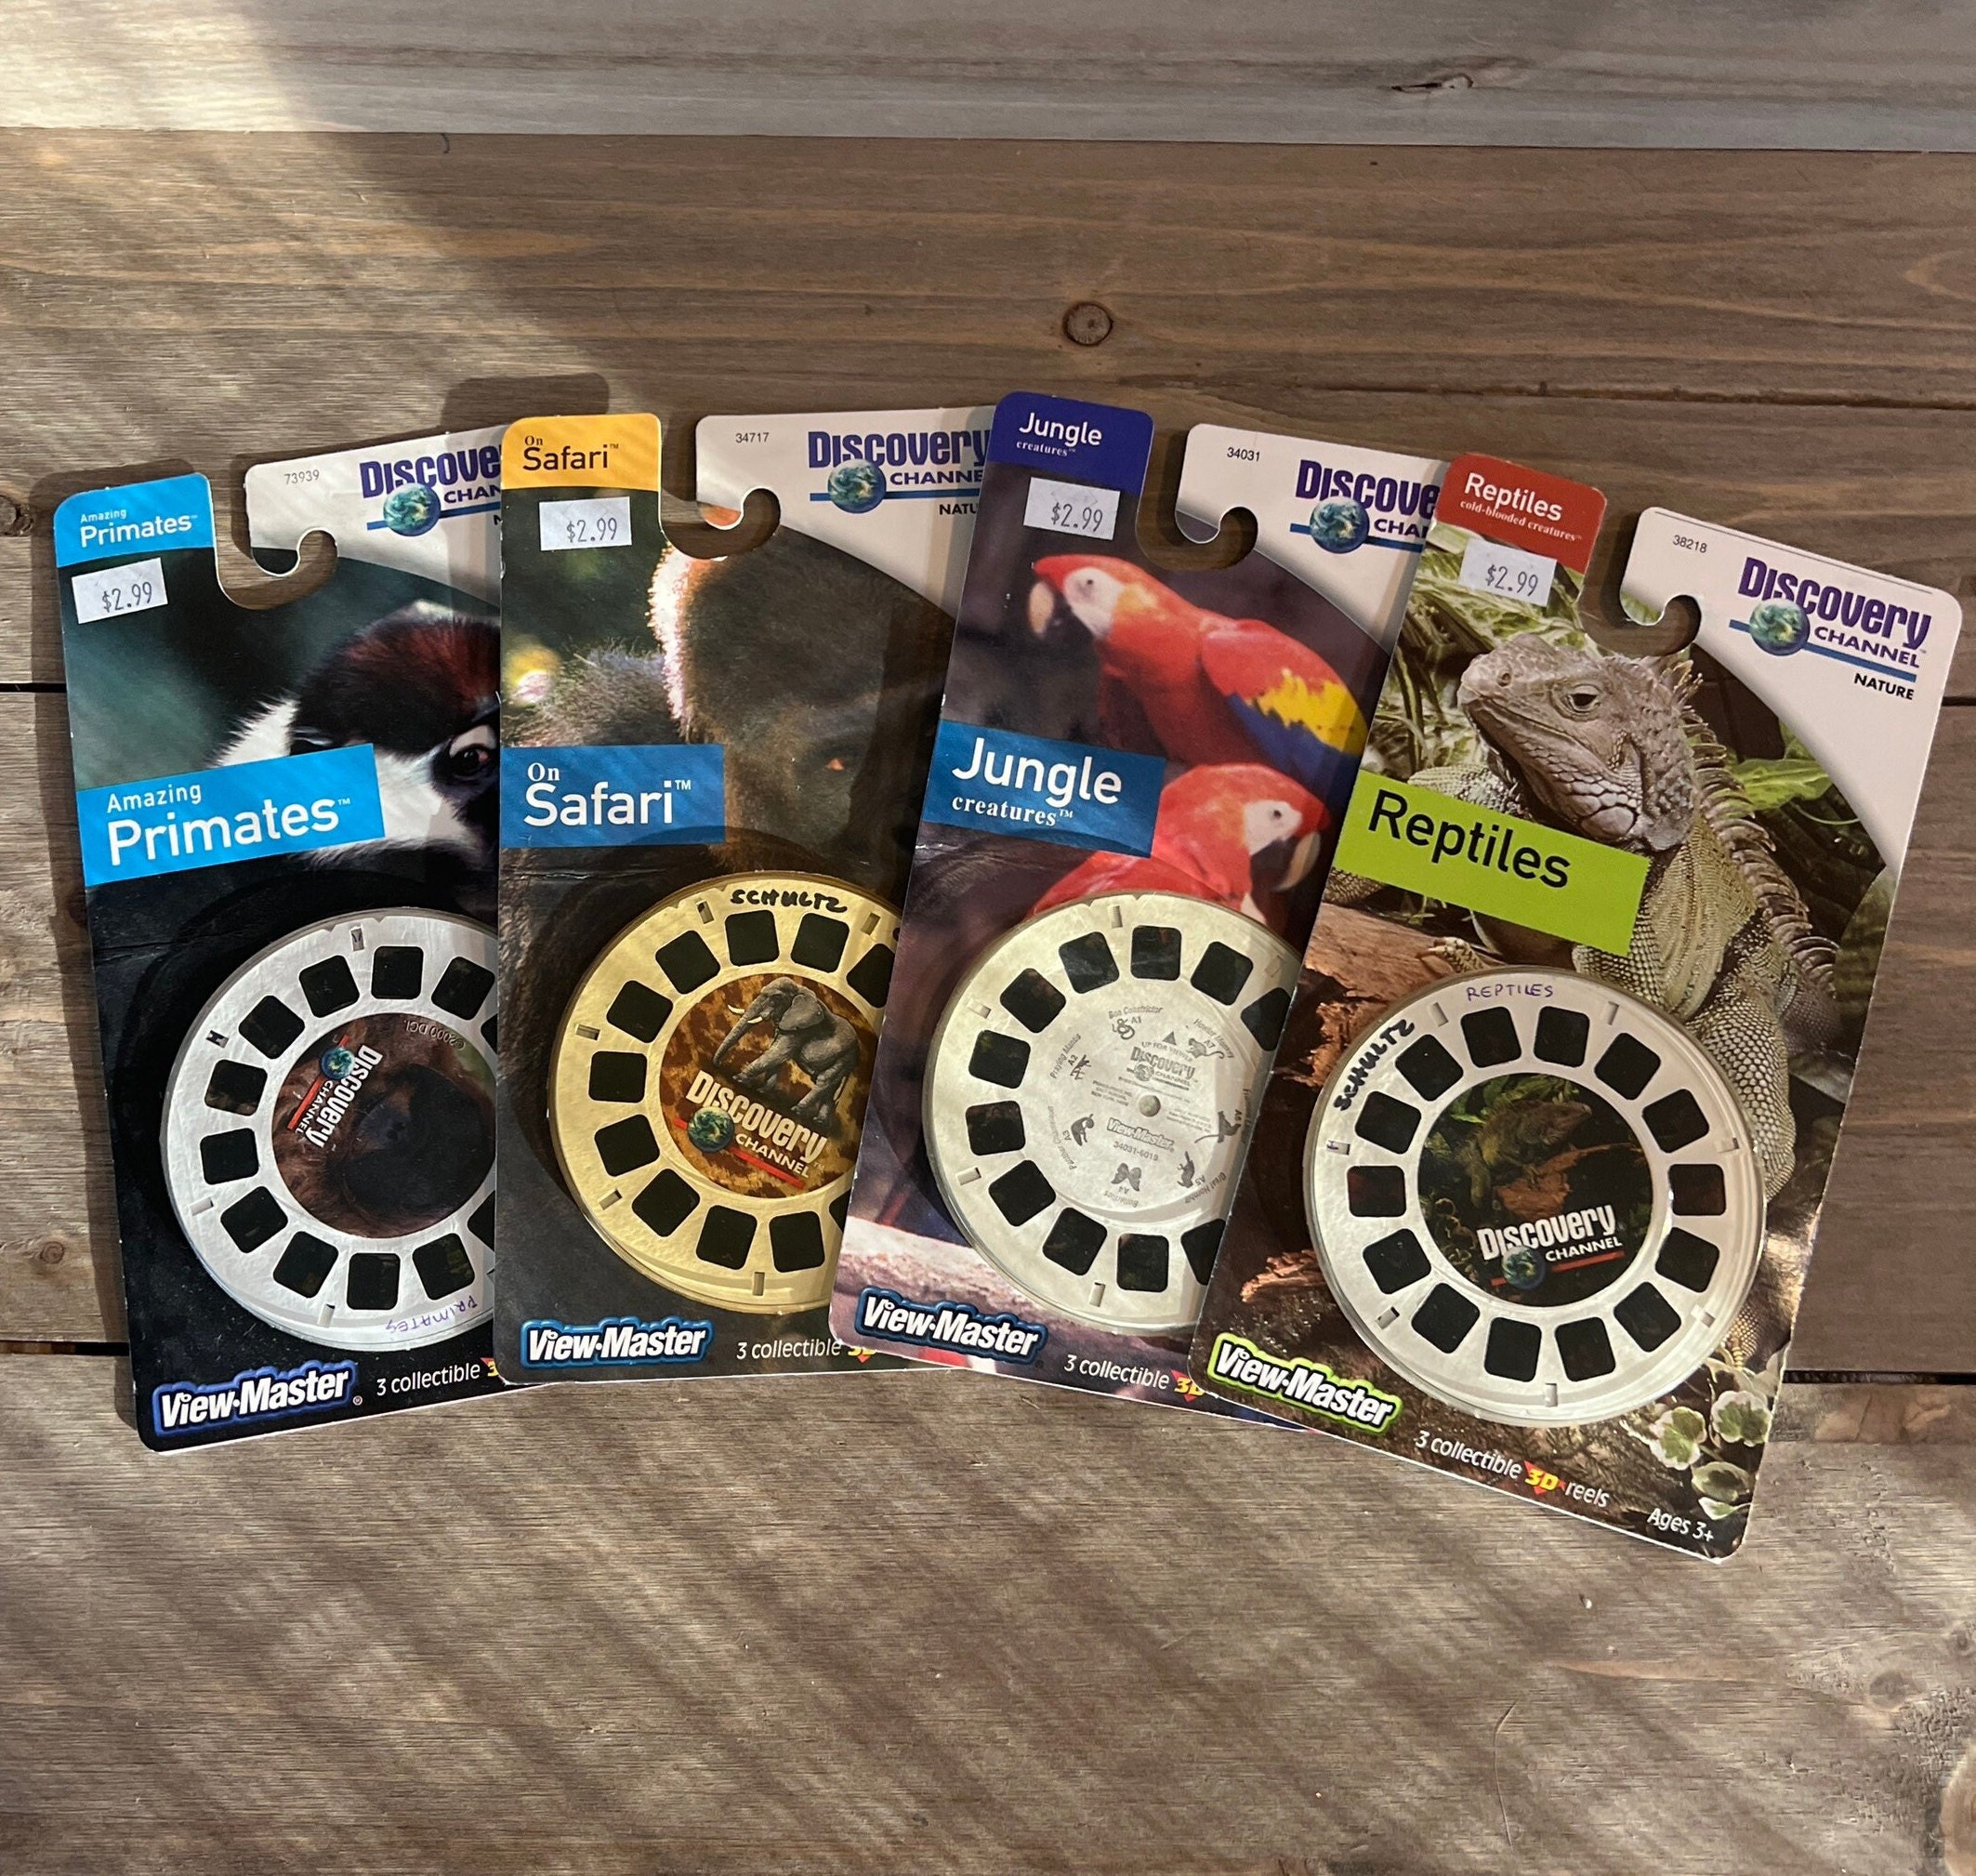 View Master Reels From Discovery Channel Nature Series Your Choice Safari,  Jungle, Reptiles and Primates All Have Been Opened -  Israel